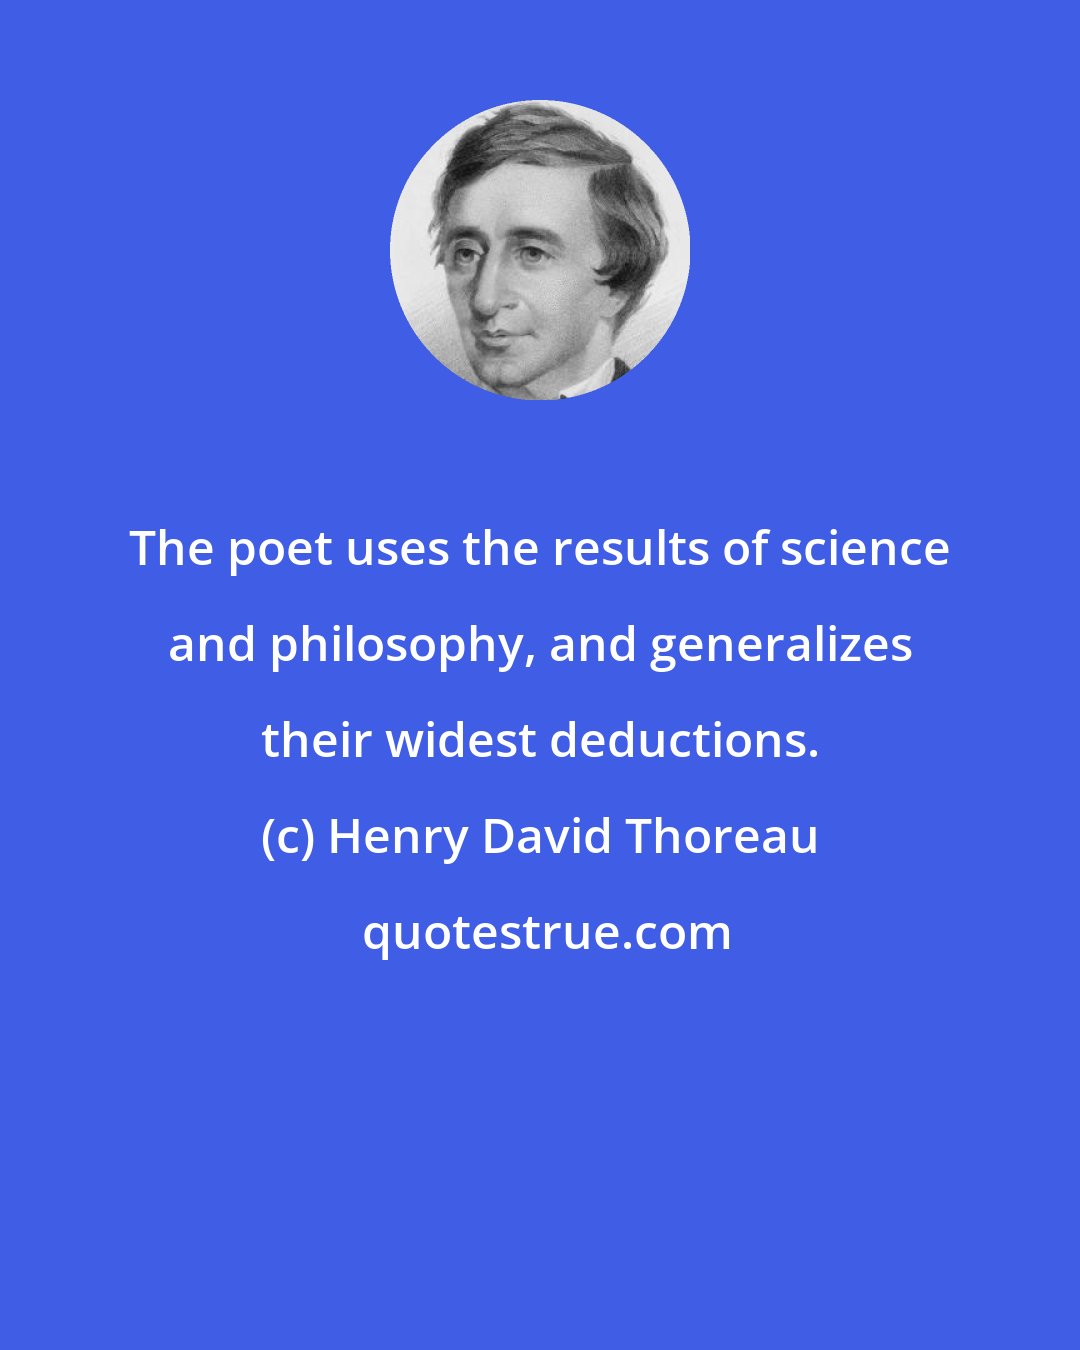 Henry David Thoreau: The poet uses the results of science and philosophy, and generalizes their widest deductions.